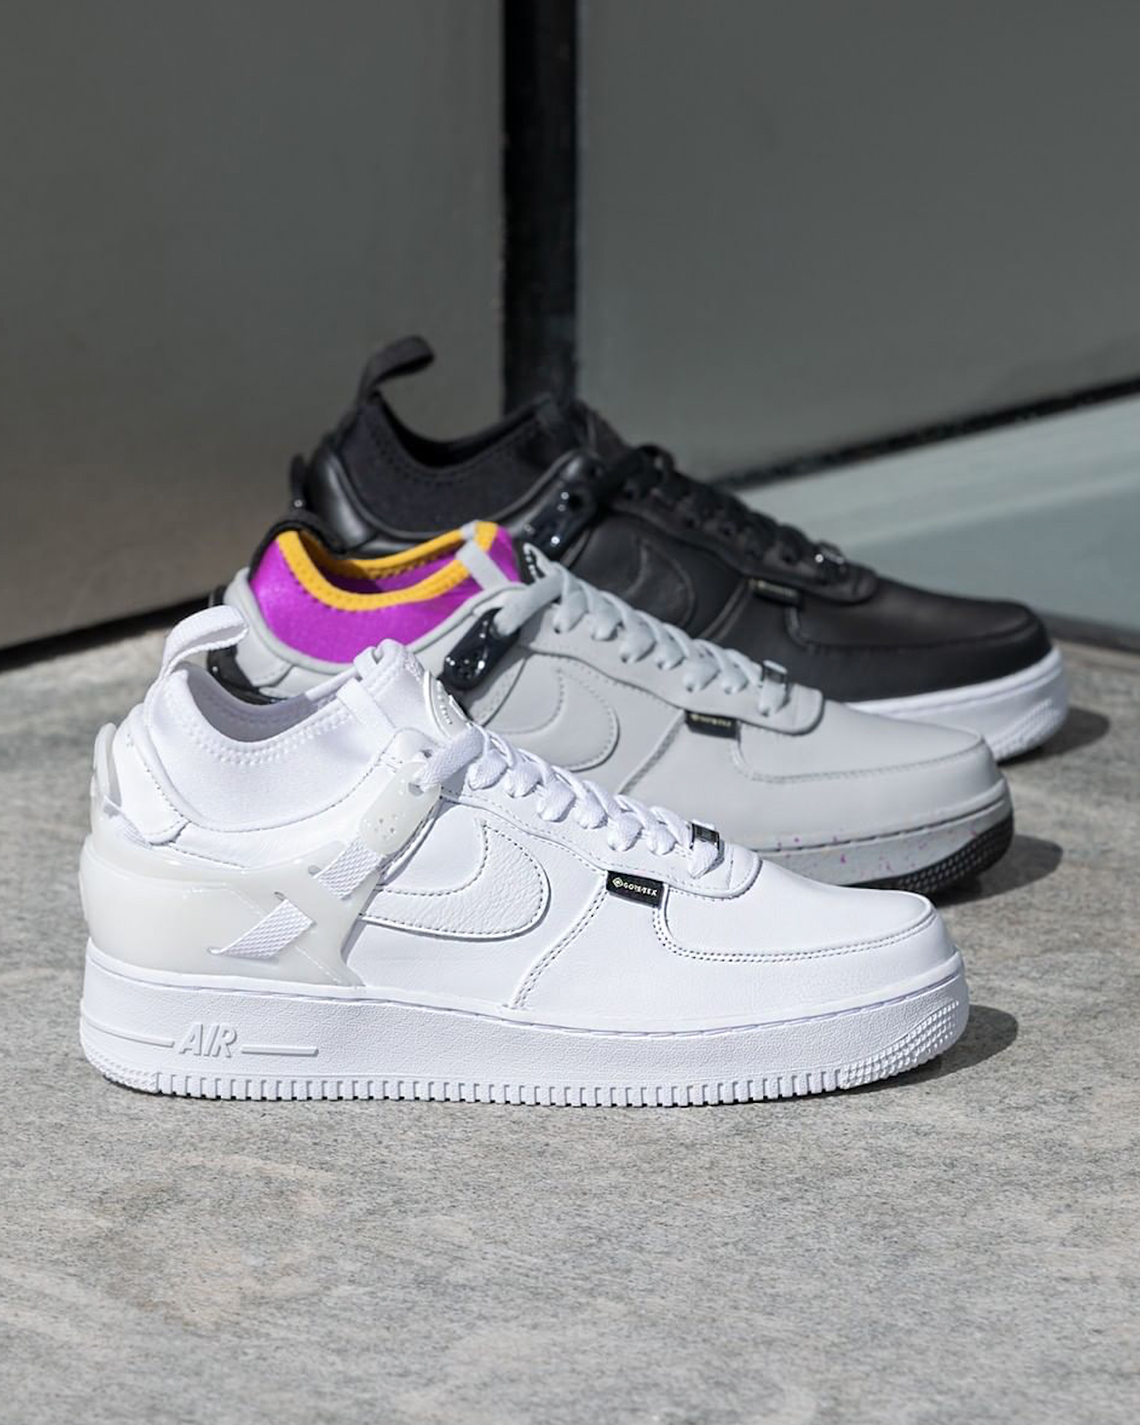 UNDERCOVER Nike Air Force 1 Gore-Tex Store List | SneakerNews.com